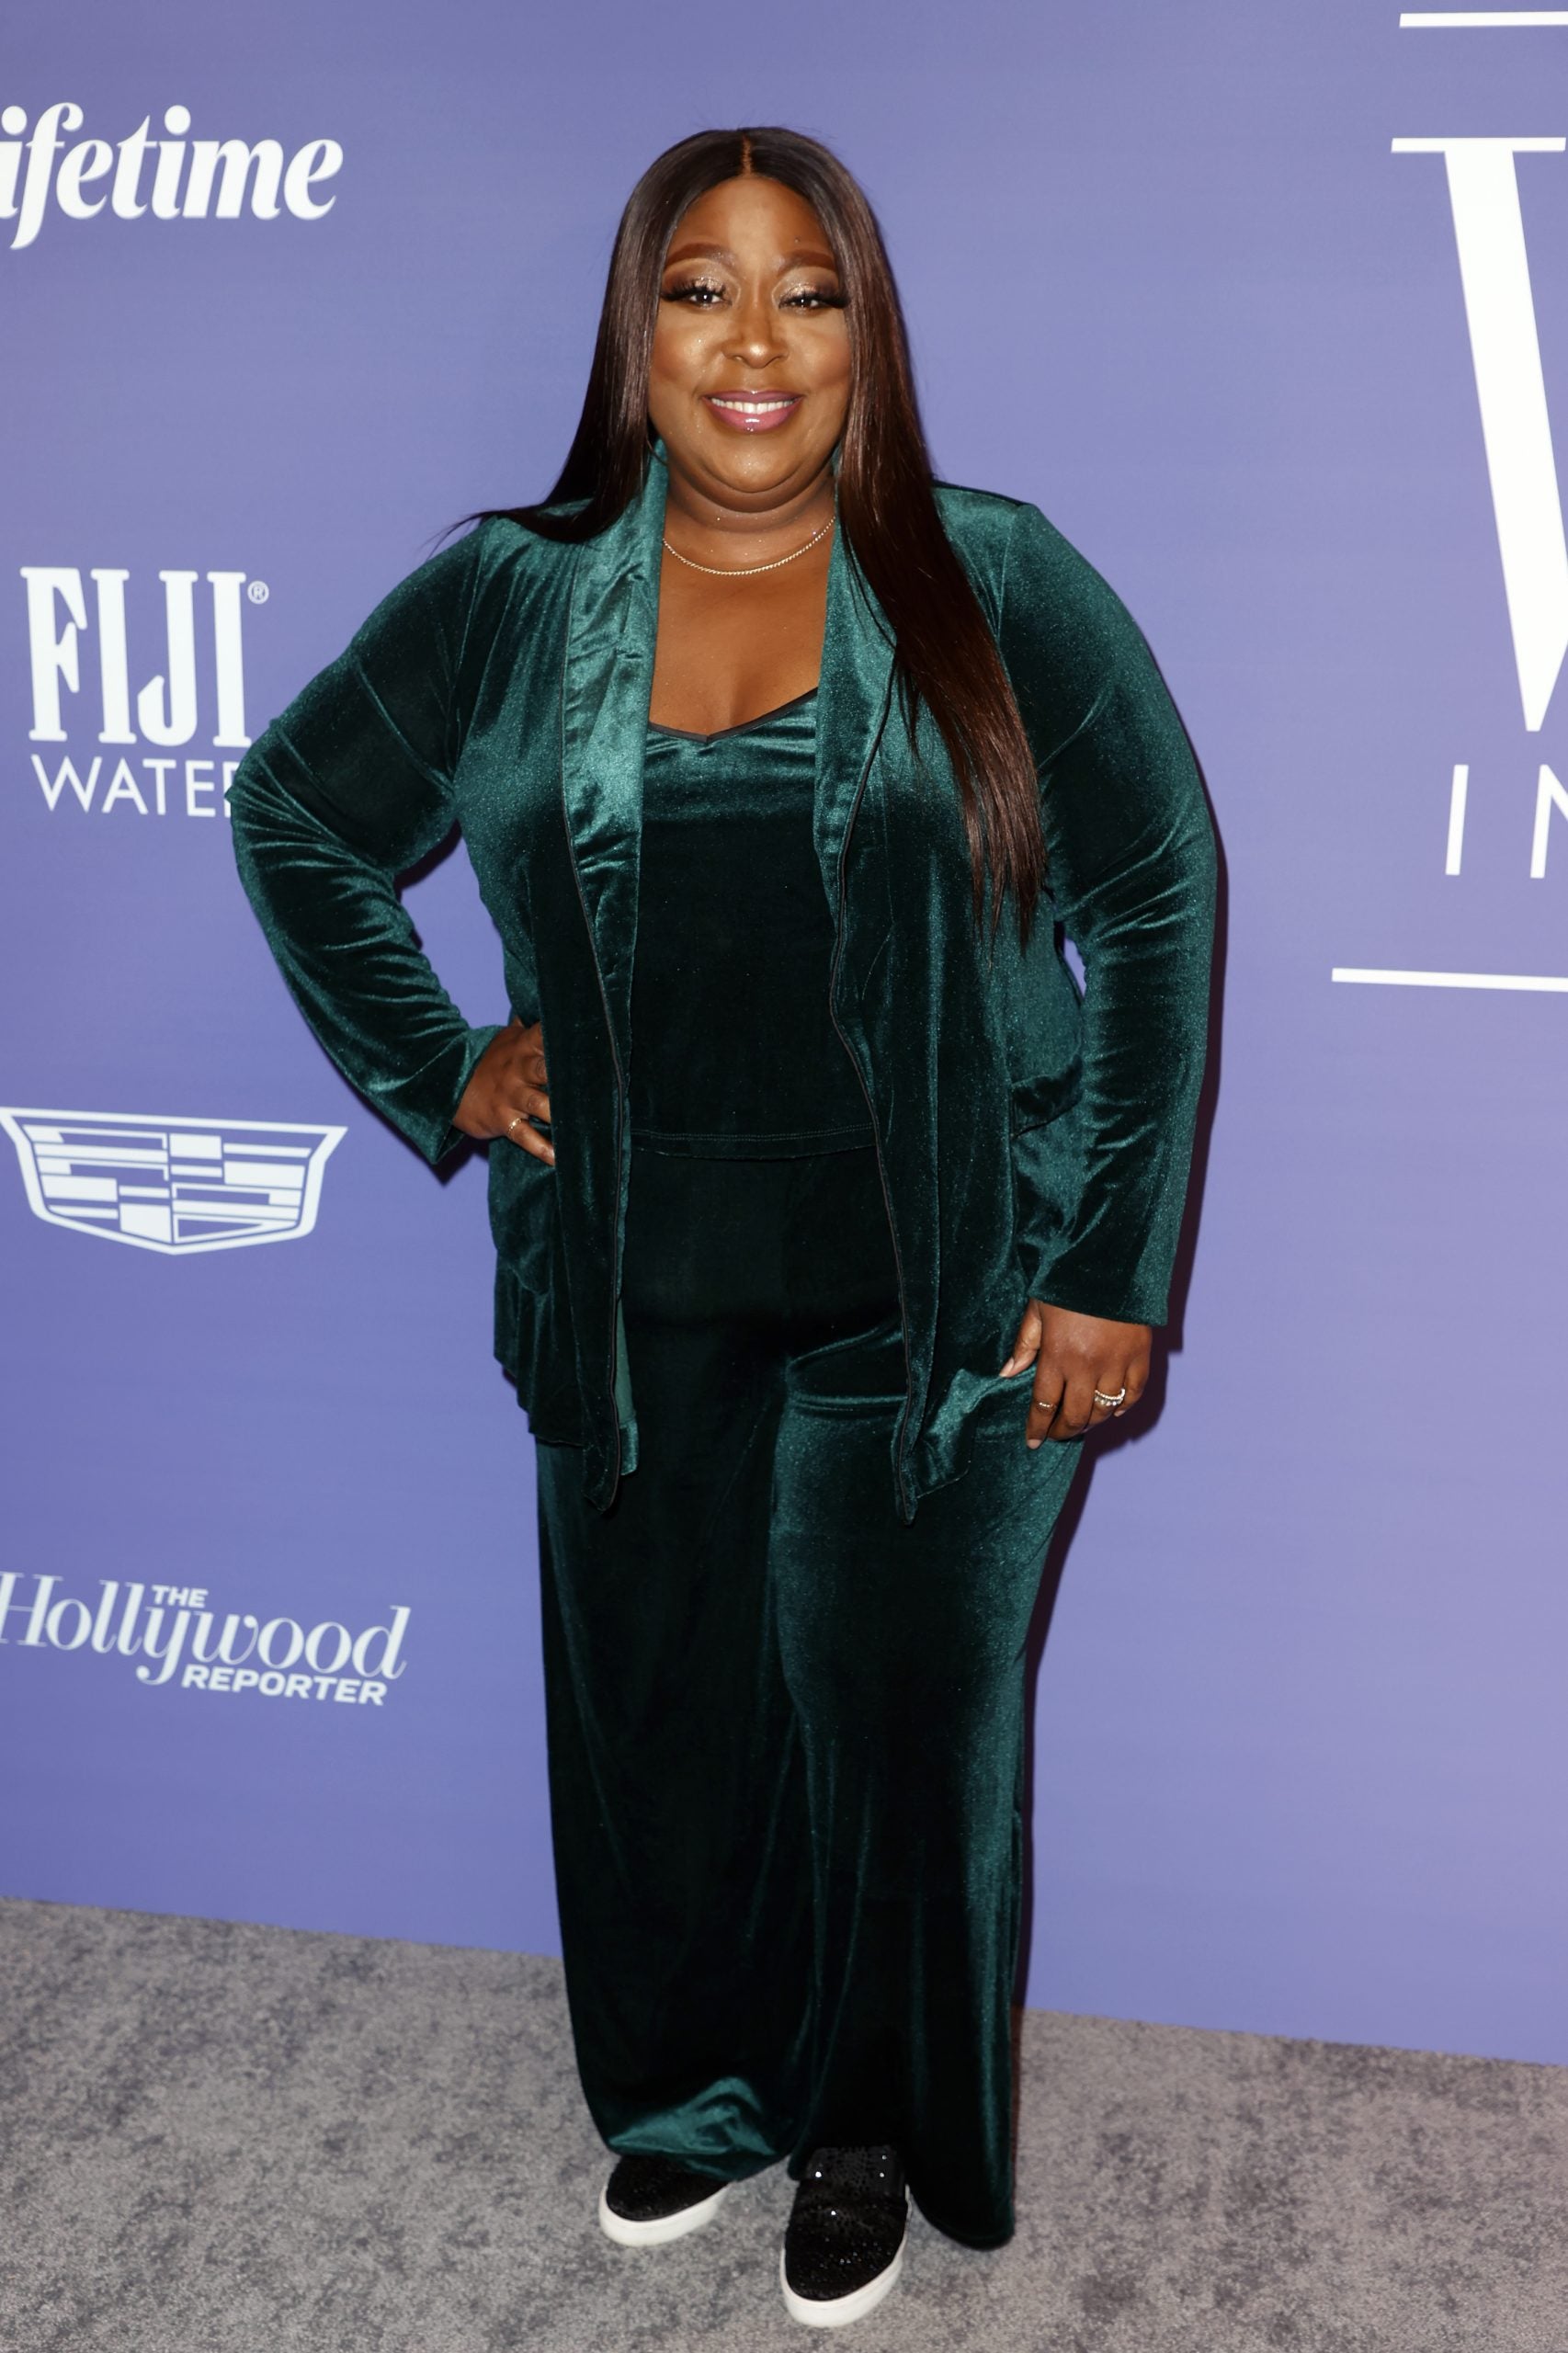 Black Actresses Step Out For The Hollywood Reporter's Power 100 Women In Entertainment Breakfast